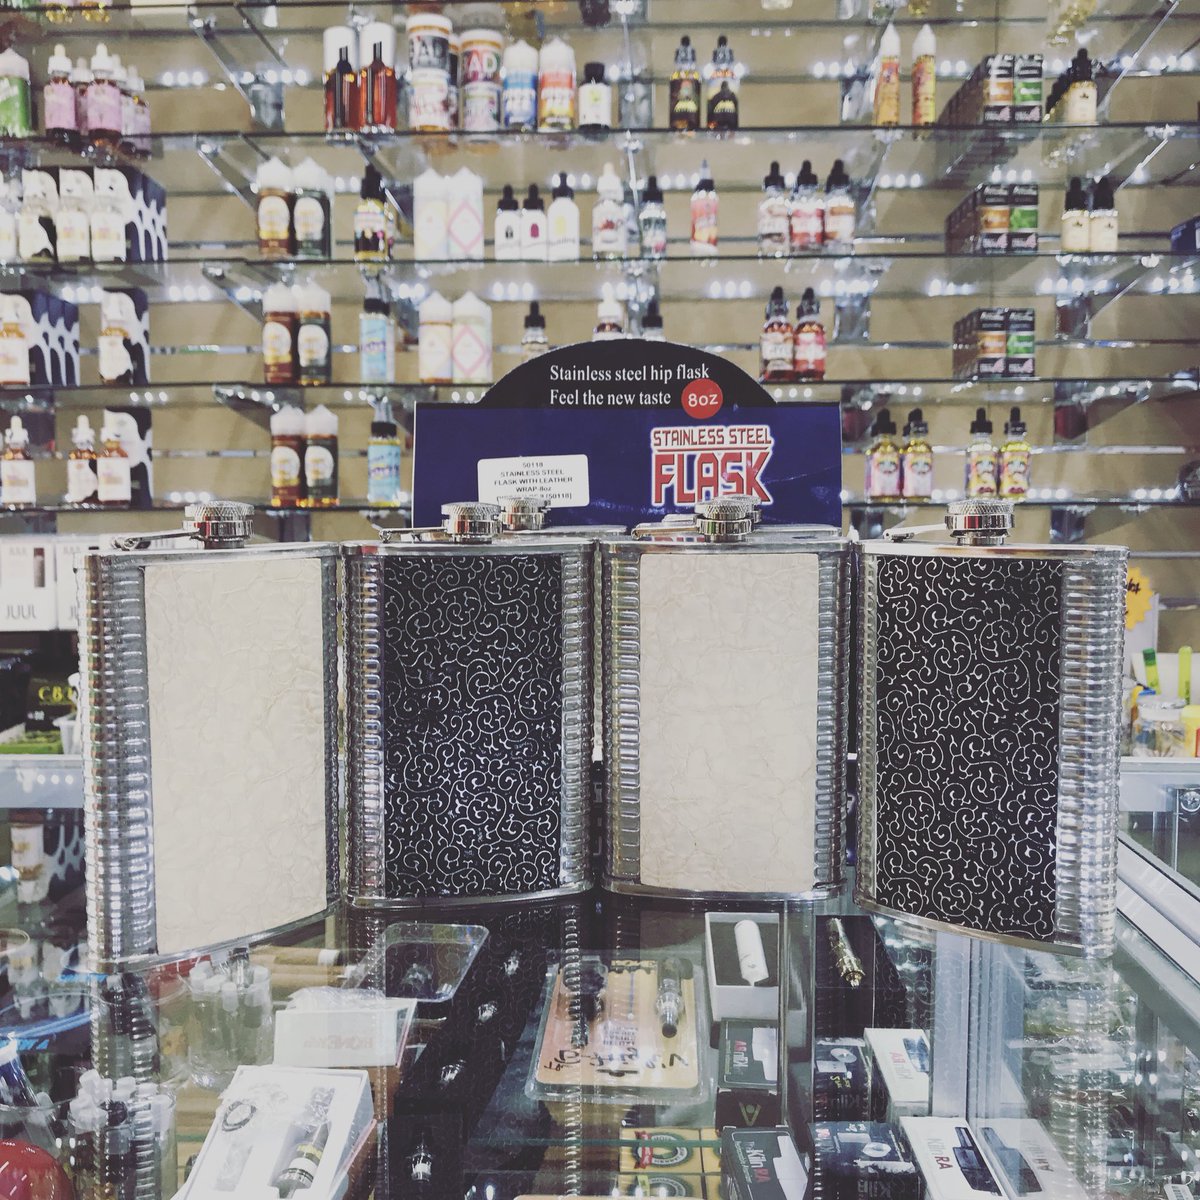 Cinco de mayo is here what are y’all doing come get a stainless steel flask before you go to the beach 🏖 stay hydrated #calle8 #calle8miami #worldofsmokenvapecalle8 #smokingaccessories #waterpipes #bestsmokingselection #bubblers #bestsmokingbrands #chilling #ilovesmoke #gaggets